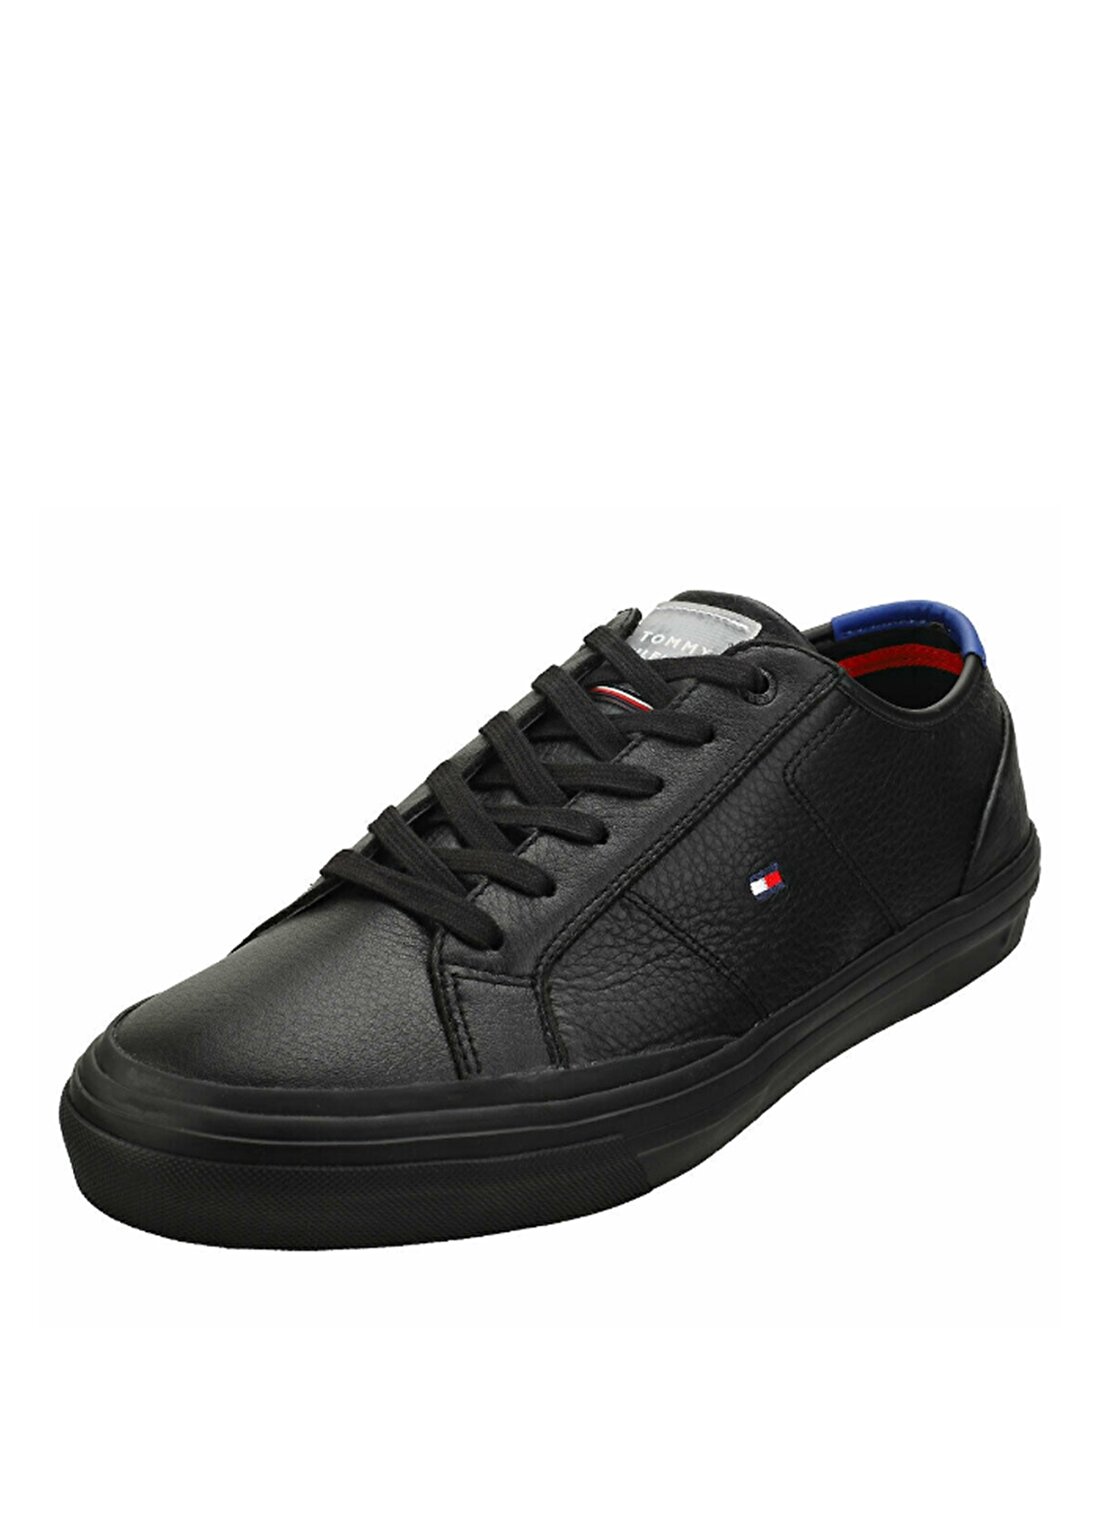 Tommy Hilfiger Core Corporate Flag Sneaker